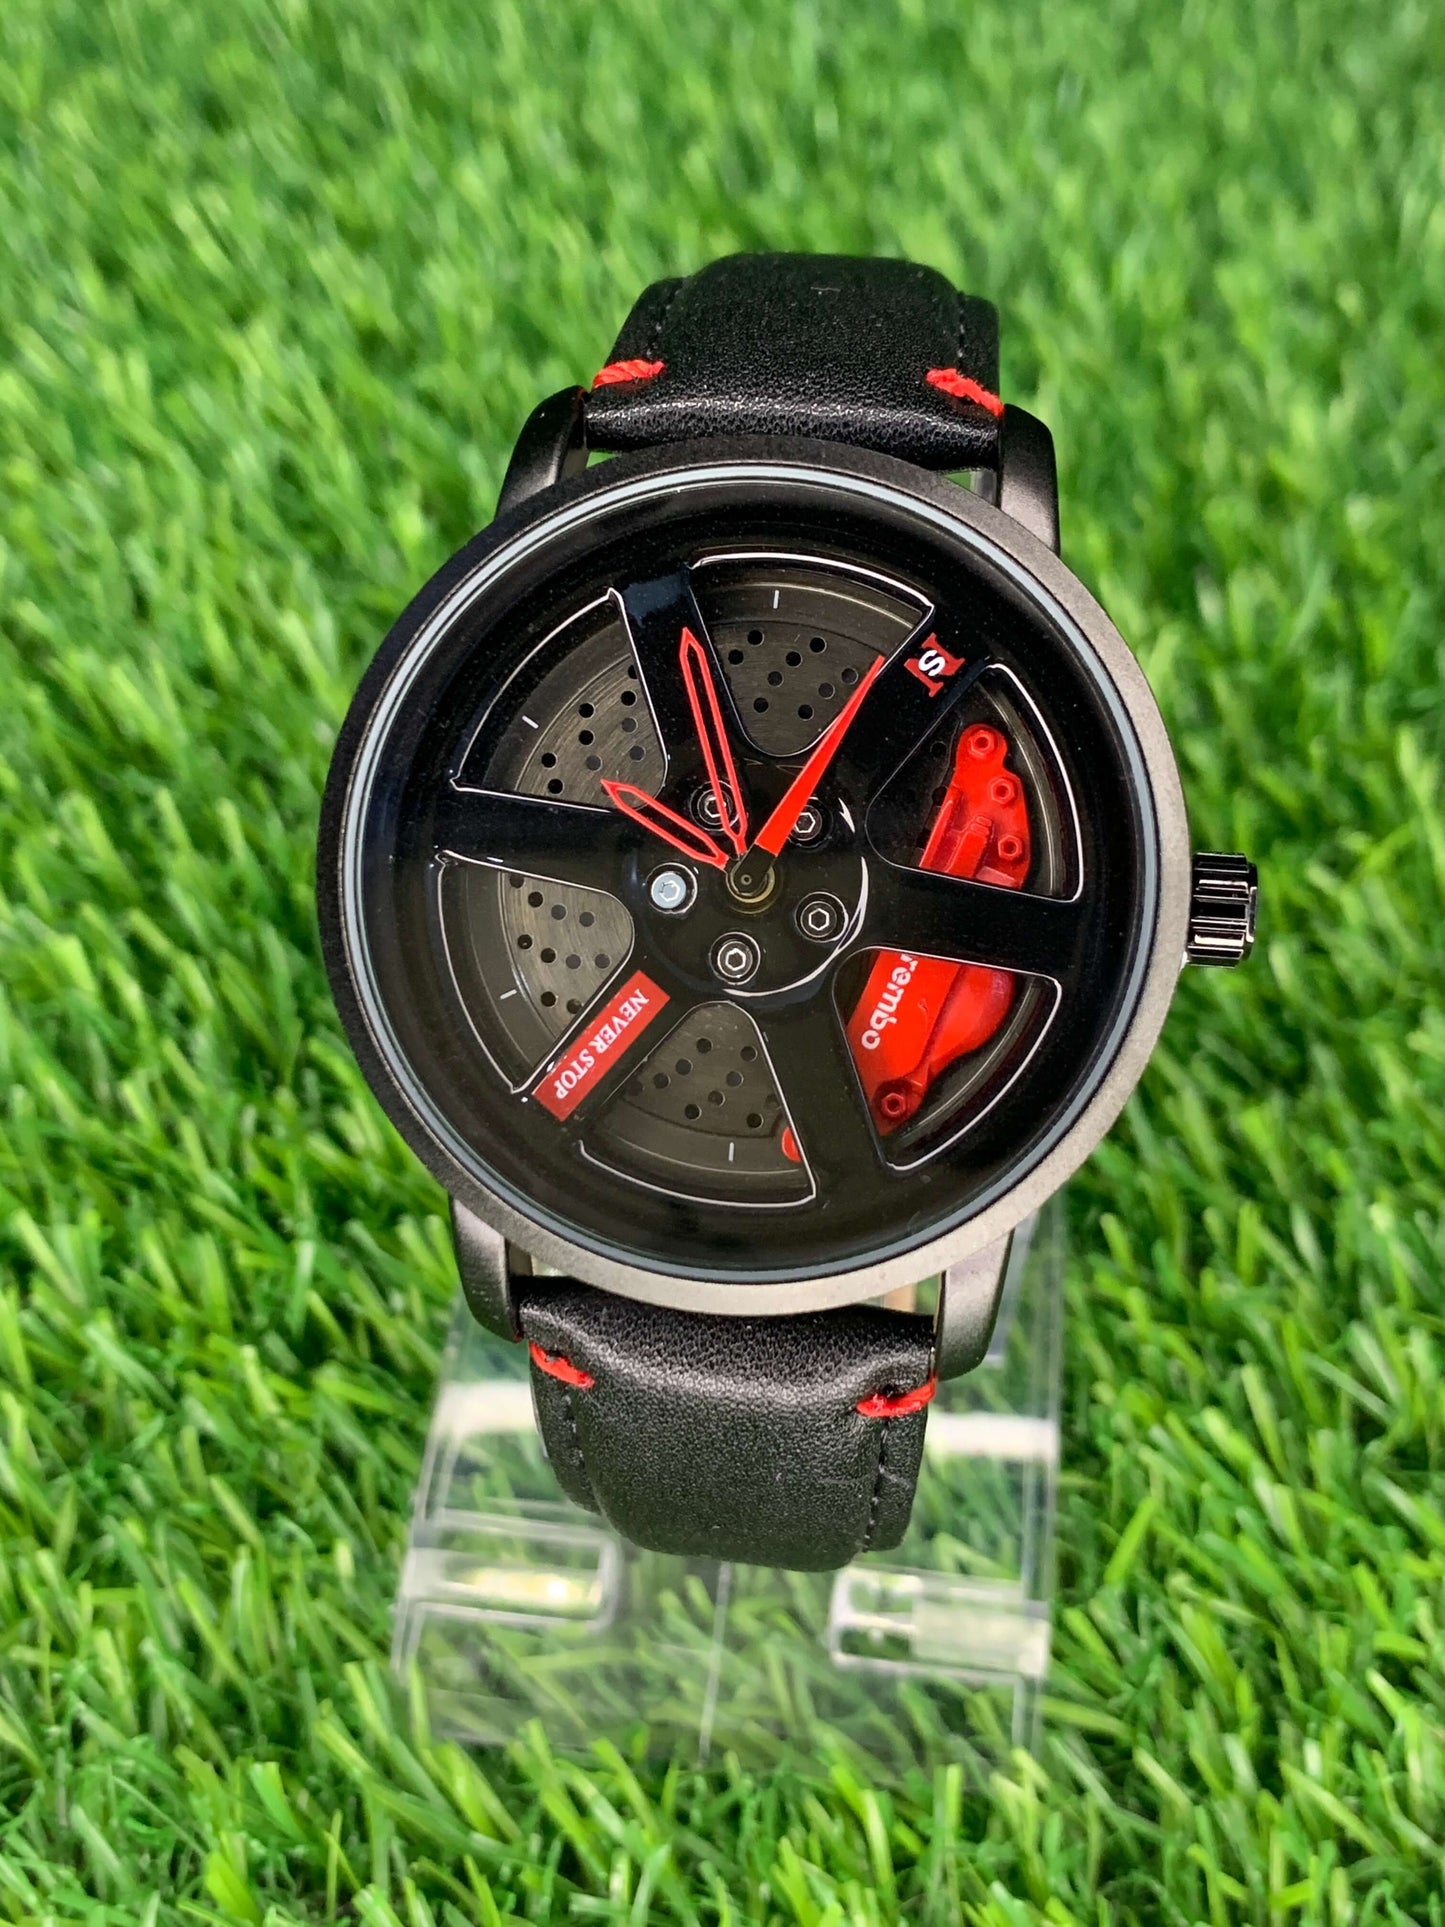 GYRO R30M WHYL - The Alloy Wheel Watch With Rotating Alloy Wheel and Pure Leather Strap